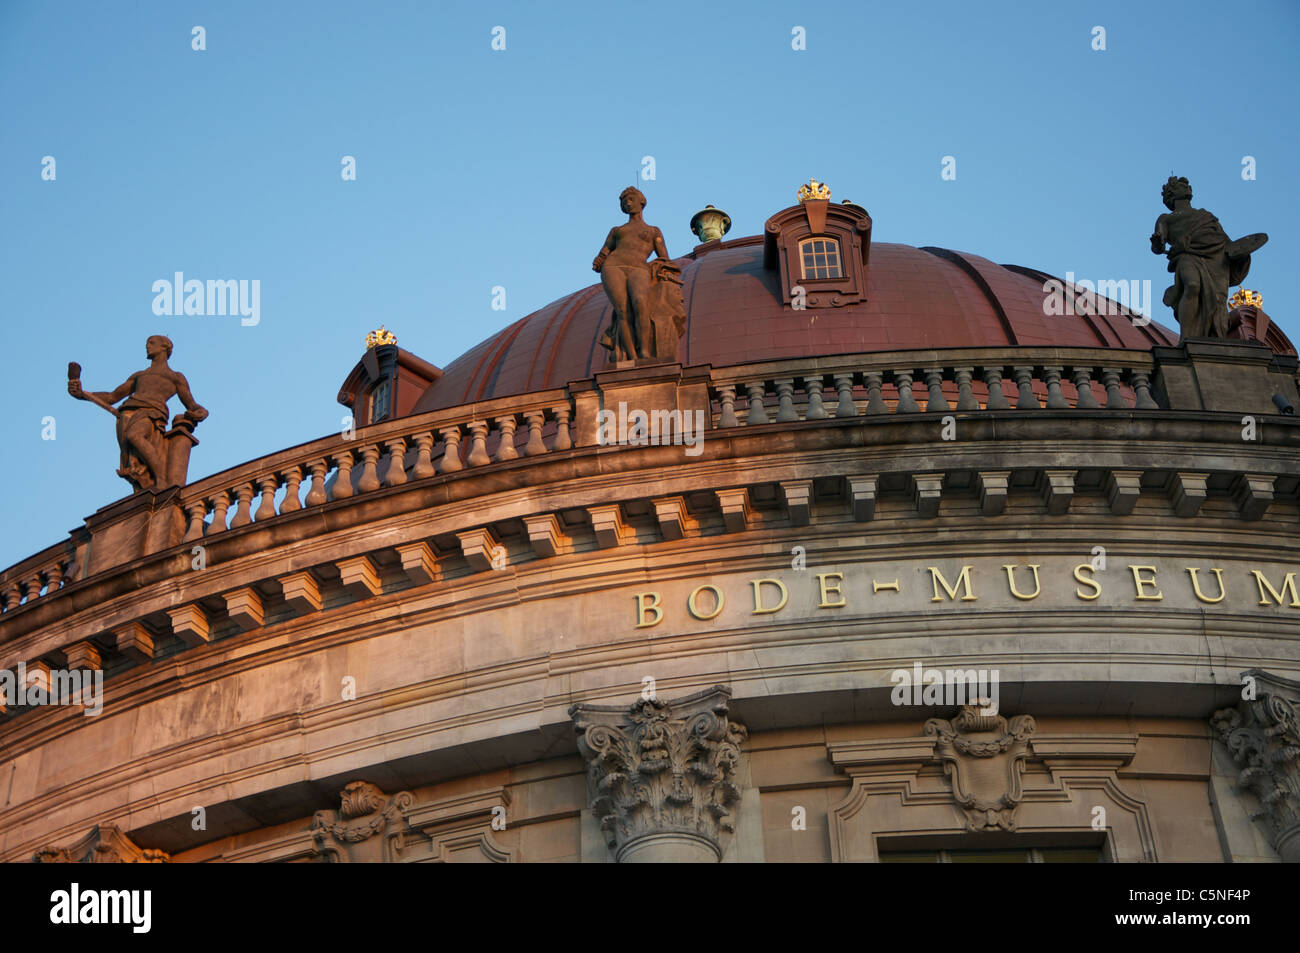 Dome of the Bode Museum Berlin with statues against a blue sky Stock Photo